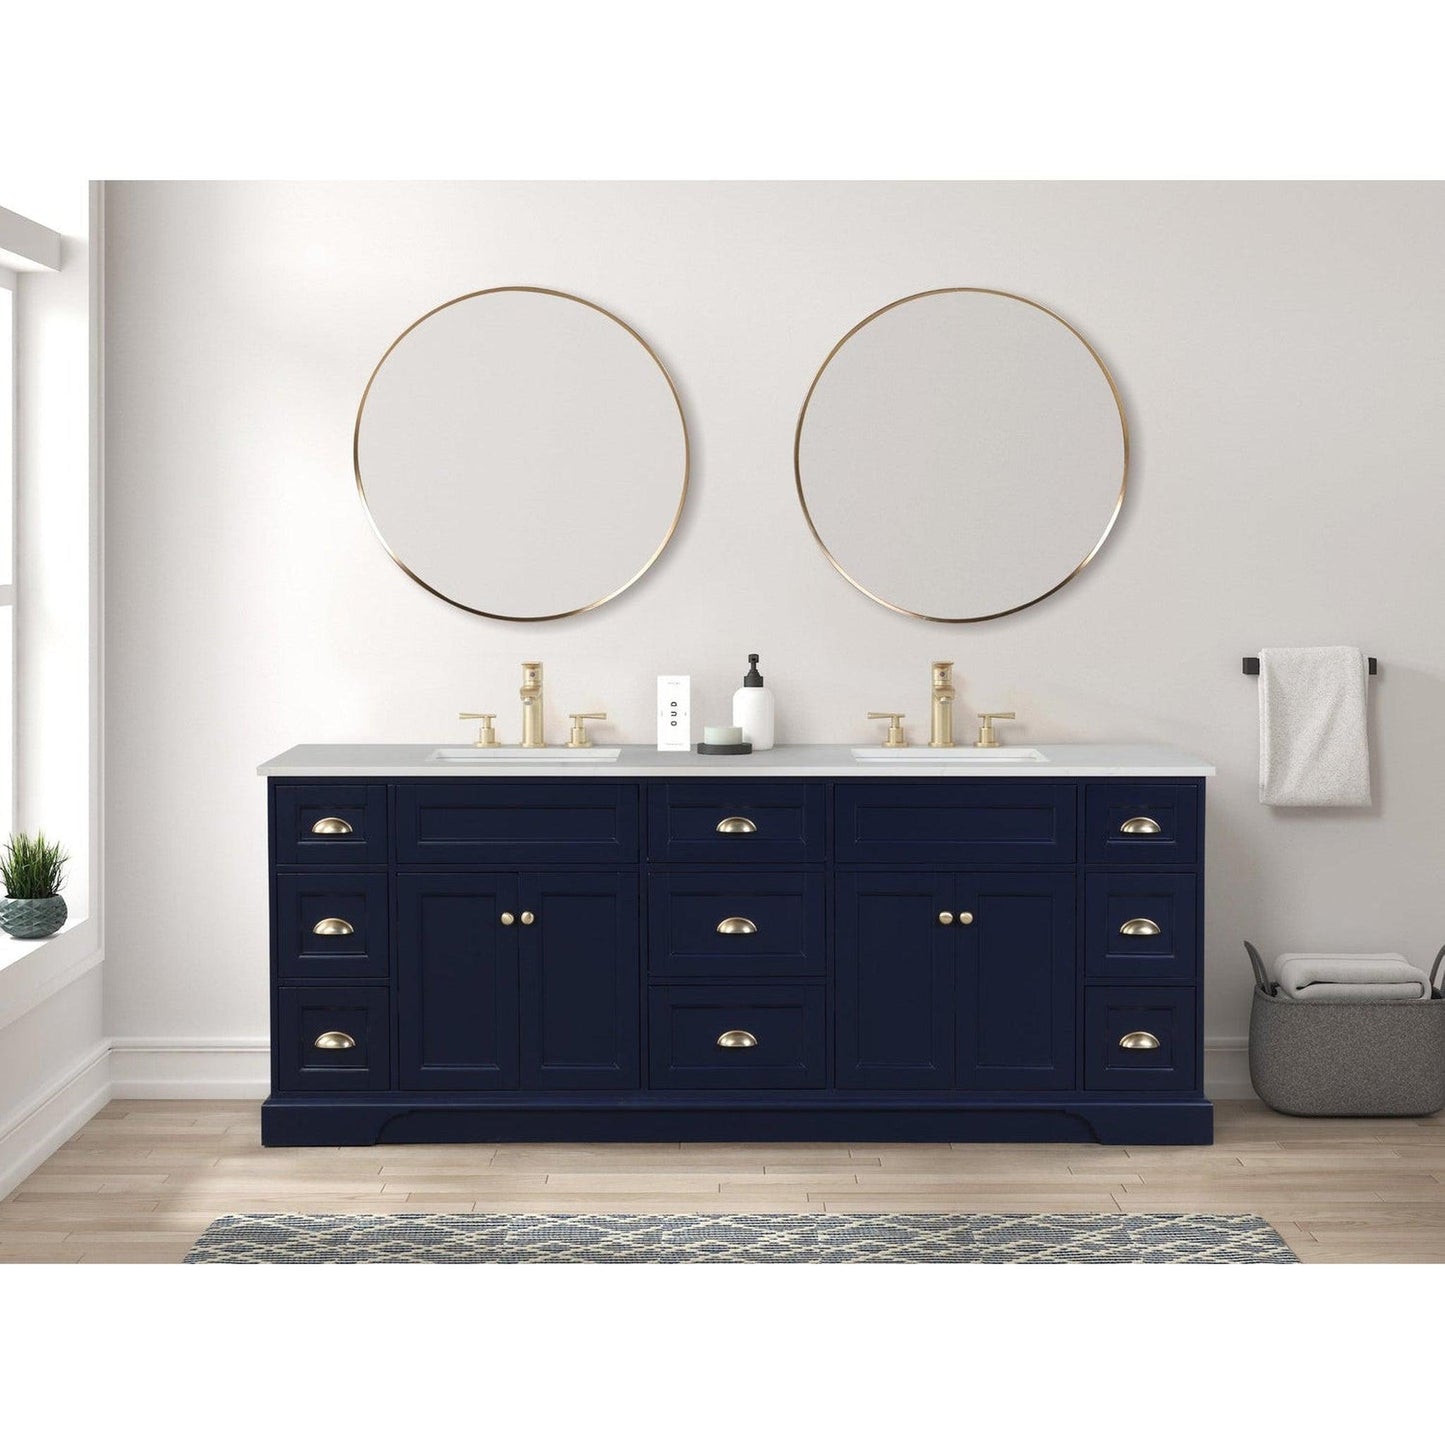 Eviva Epic 84" x 34" Blue Freestanding Bathroom Vanity With Brushed Gold Hardware and Quartz Countertop With Double Undermount Sink